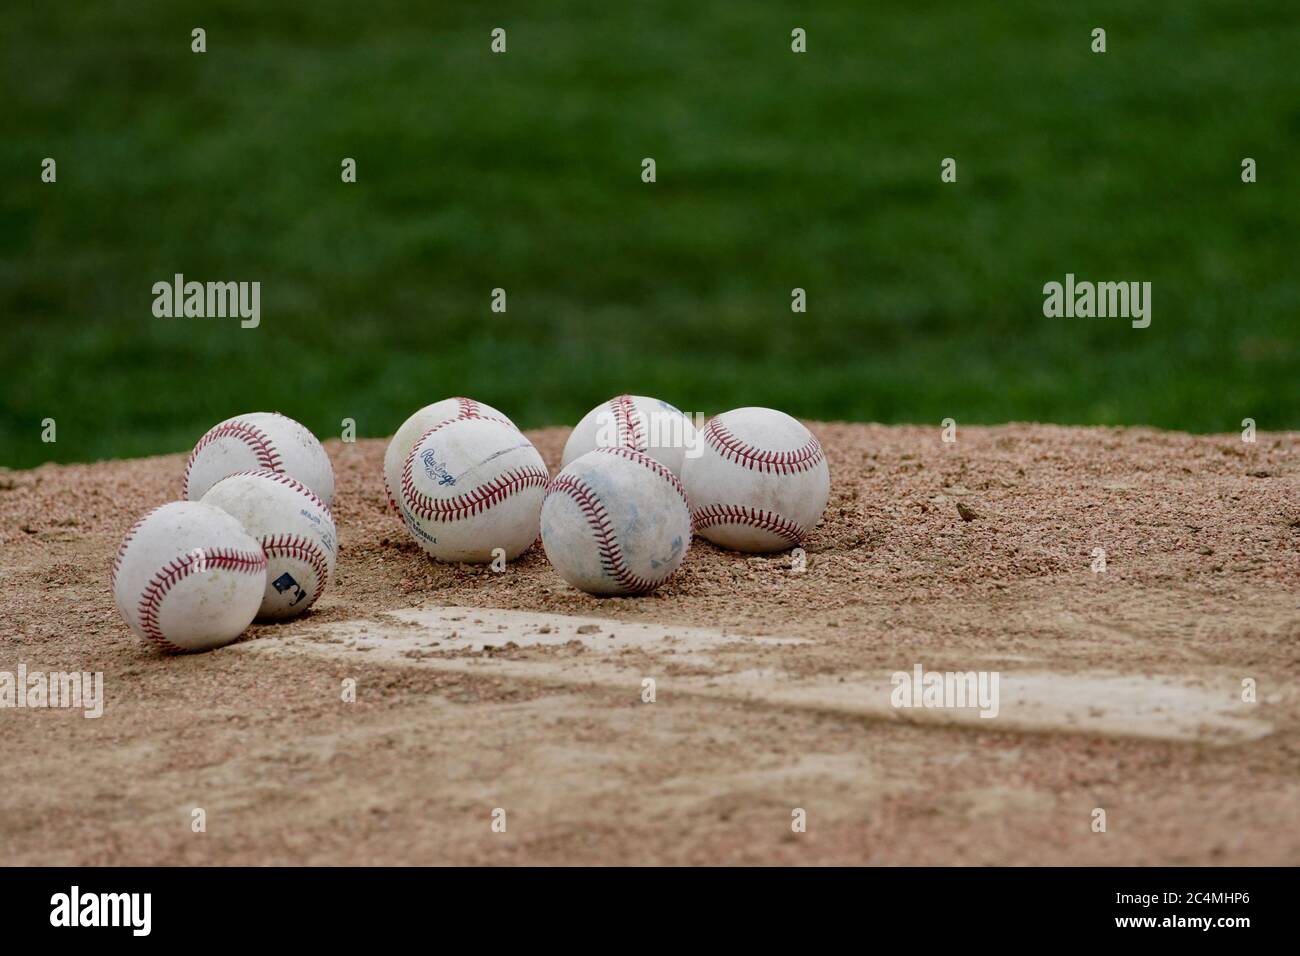 A collection of baseballs on the pitching mound. Stock Photo